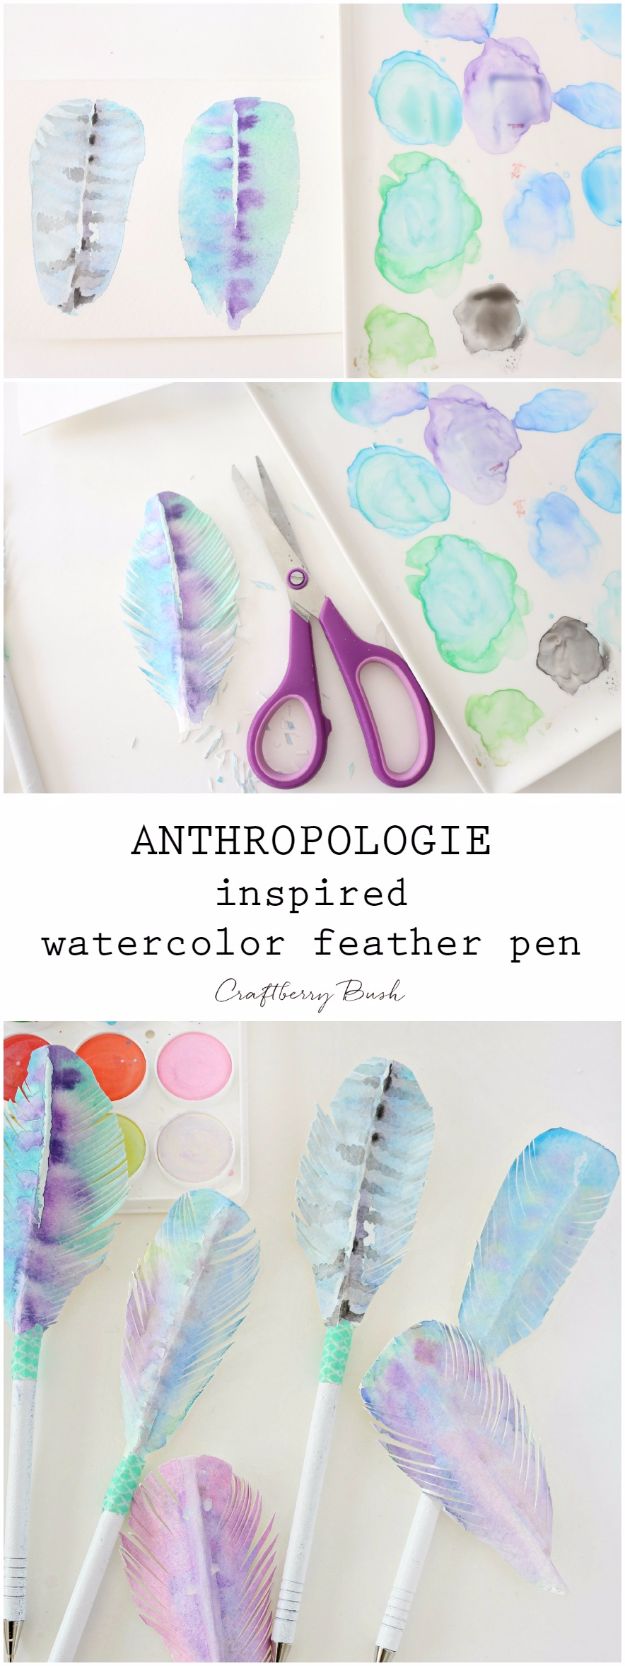 Anthropologie DIY Hacks, Clothes, Sewing Projects and Jewelry Fashion - Pillows, Bedding and Curtains - Tables and furniture - Mugs and Kitchen Decorations - DIY Room Decor and Cool Ideas for the Home | Anthropologie Inspired Water Color Feather Pen 